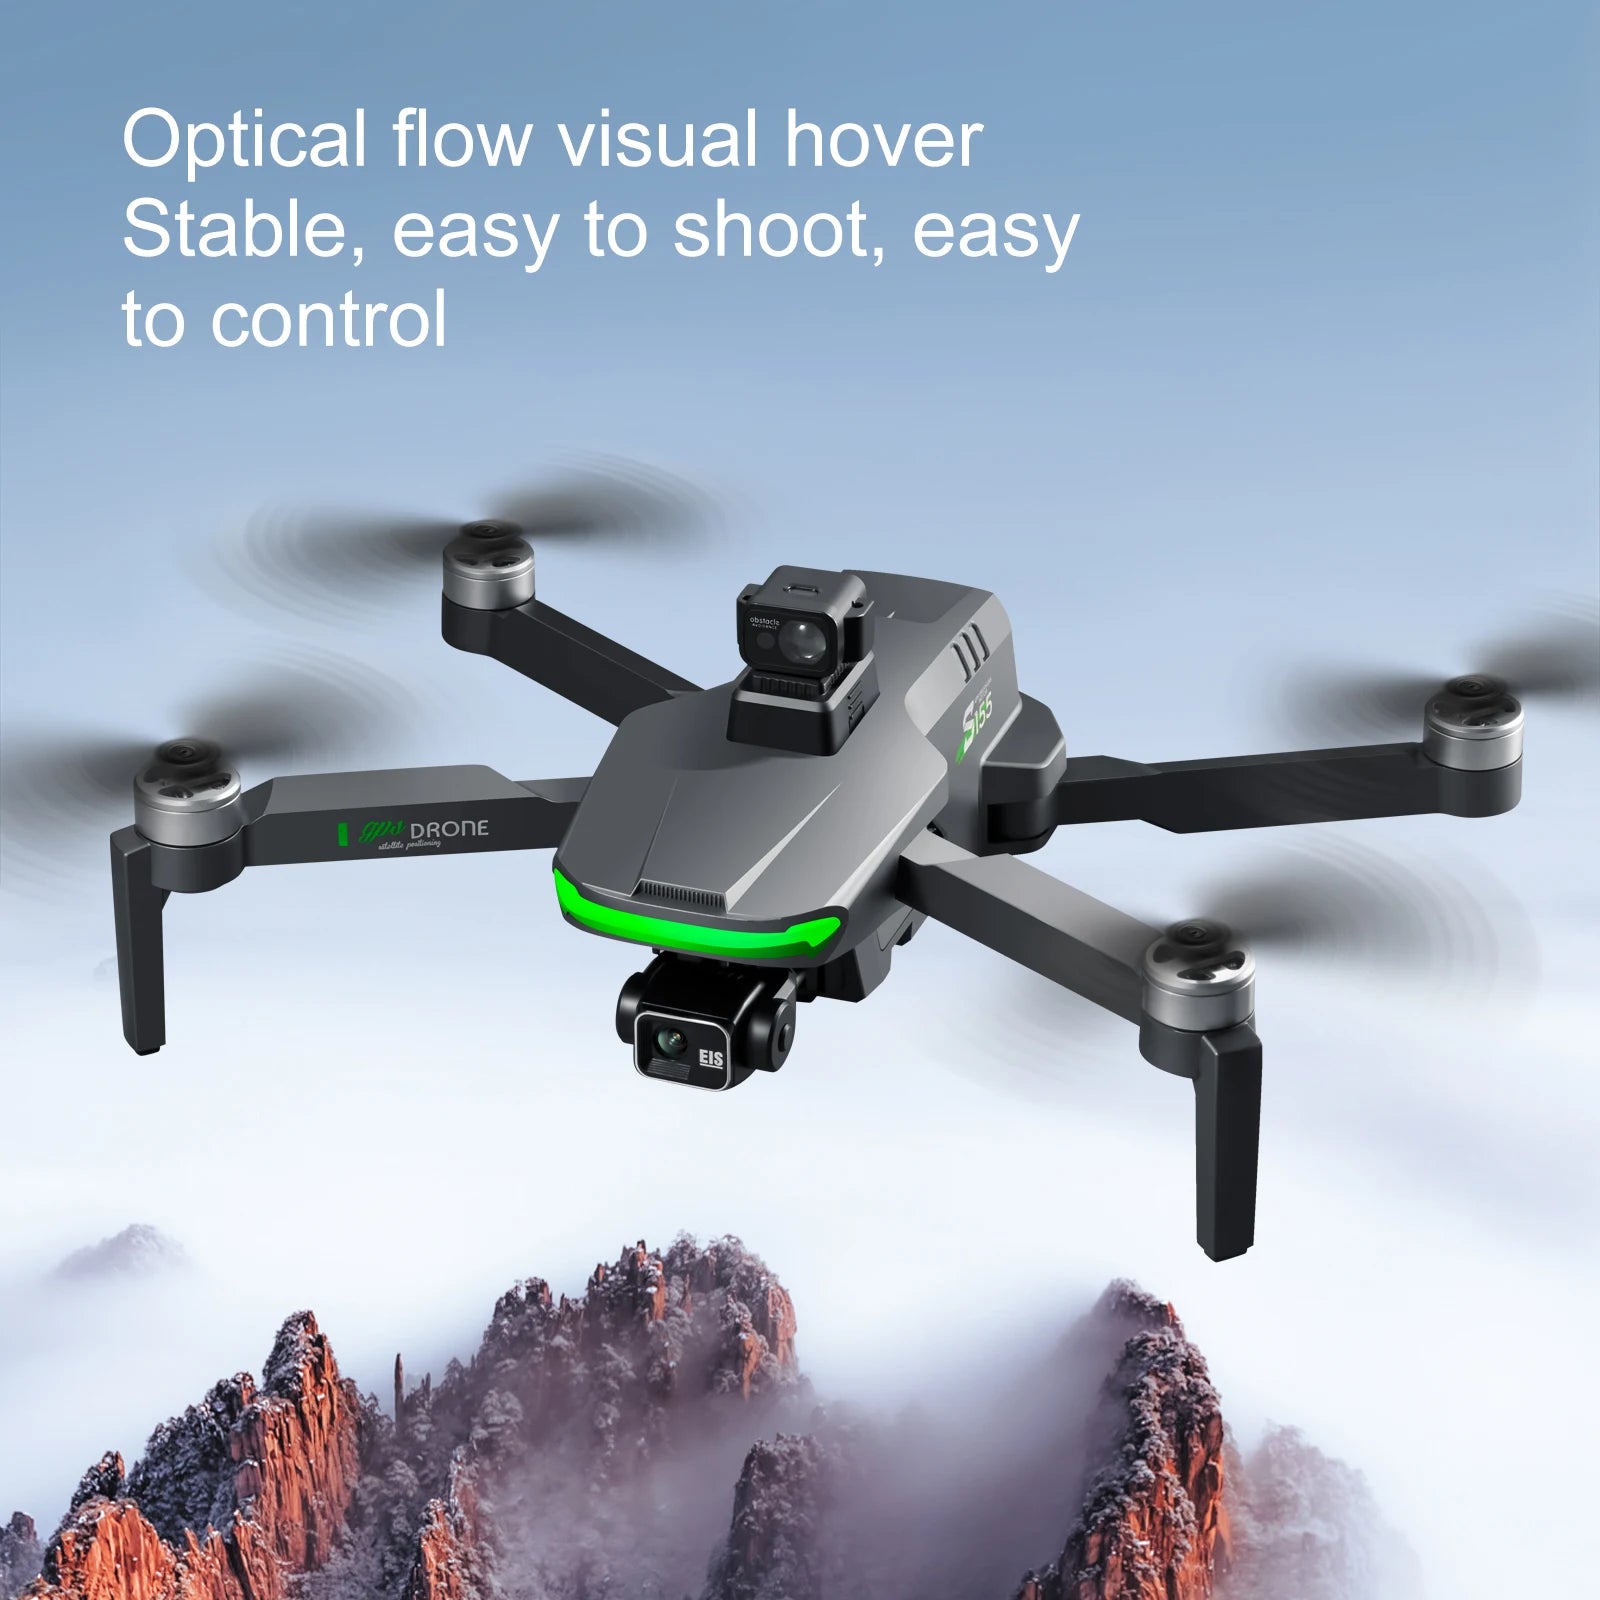 S155 Pro GPS Drone, Optical flow visual hover Stable, easy to shoot; easy to control W Gp